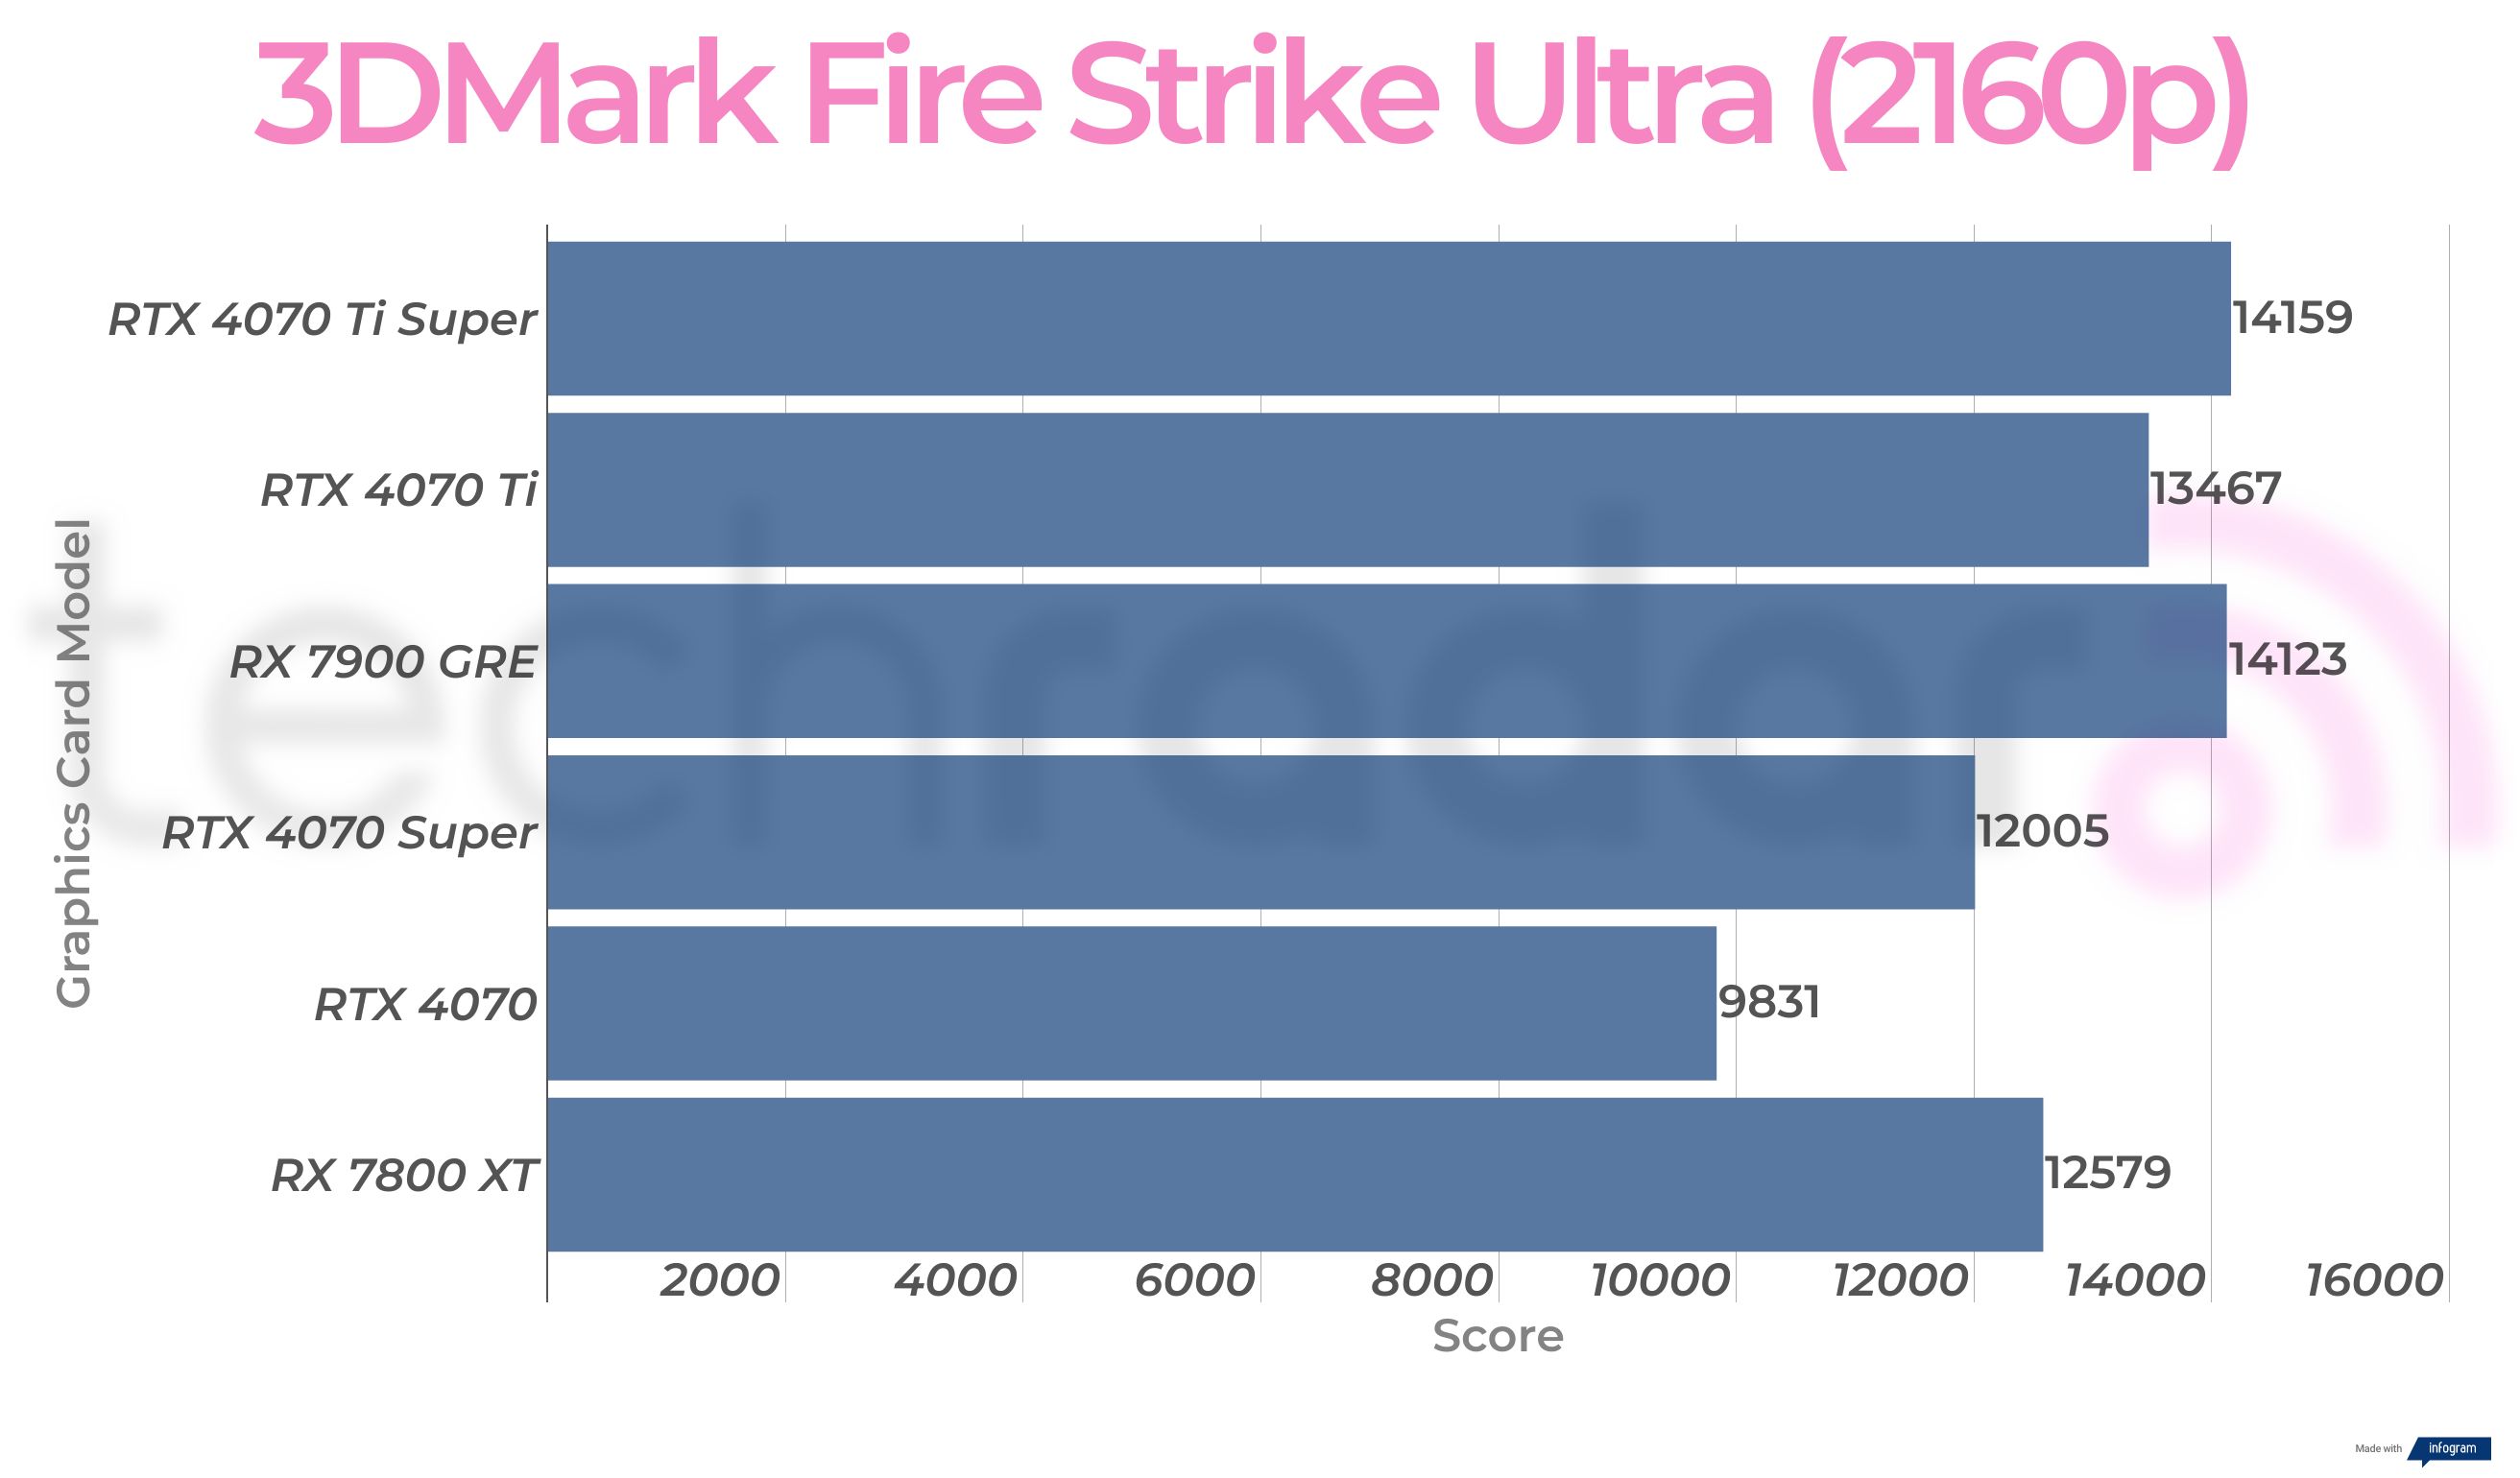 Rx 7900 GRE synthetic benchmark results